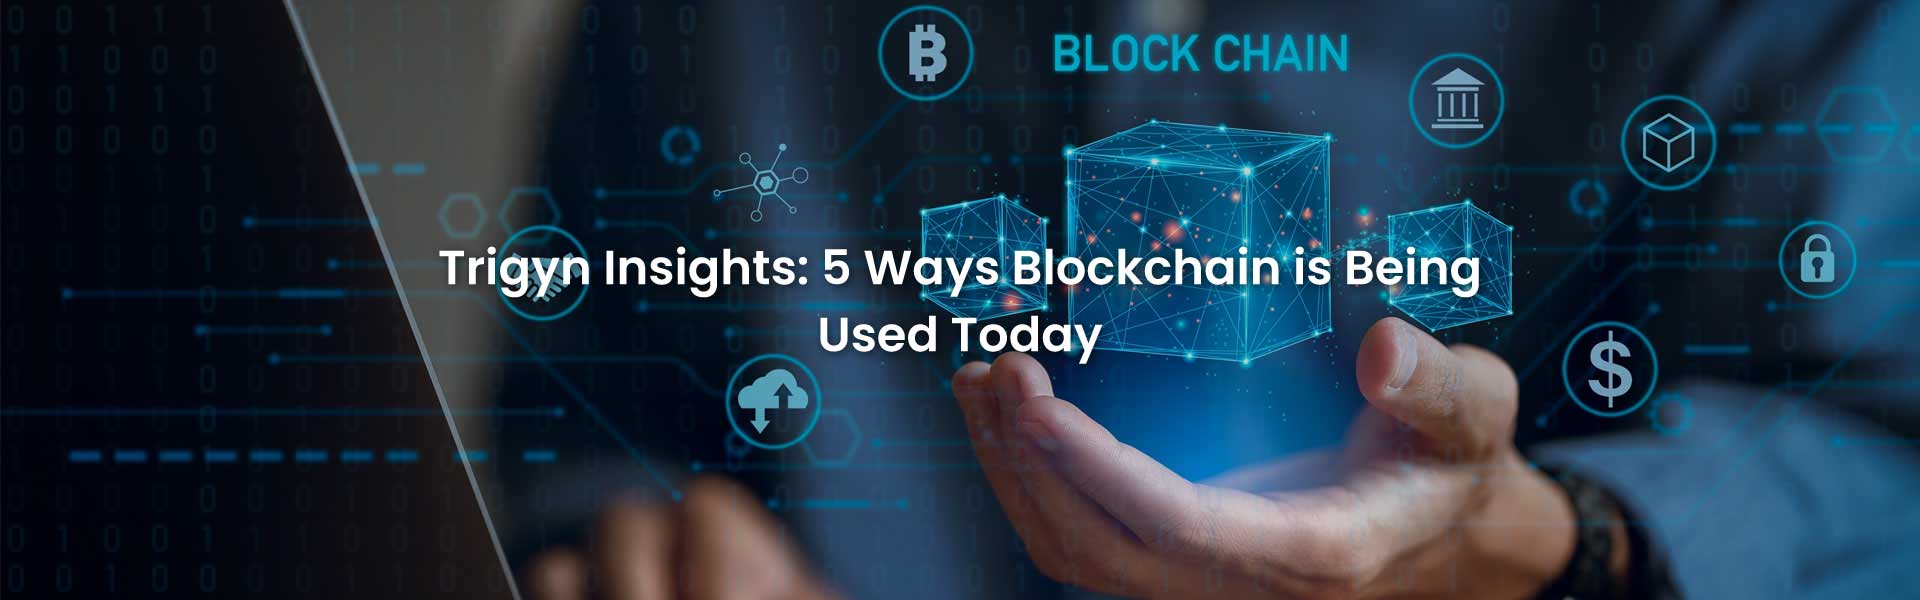 Blockchain is Being Used Today